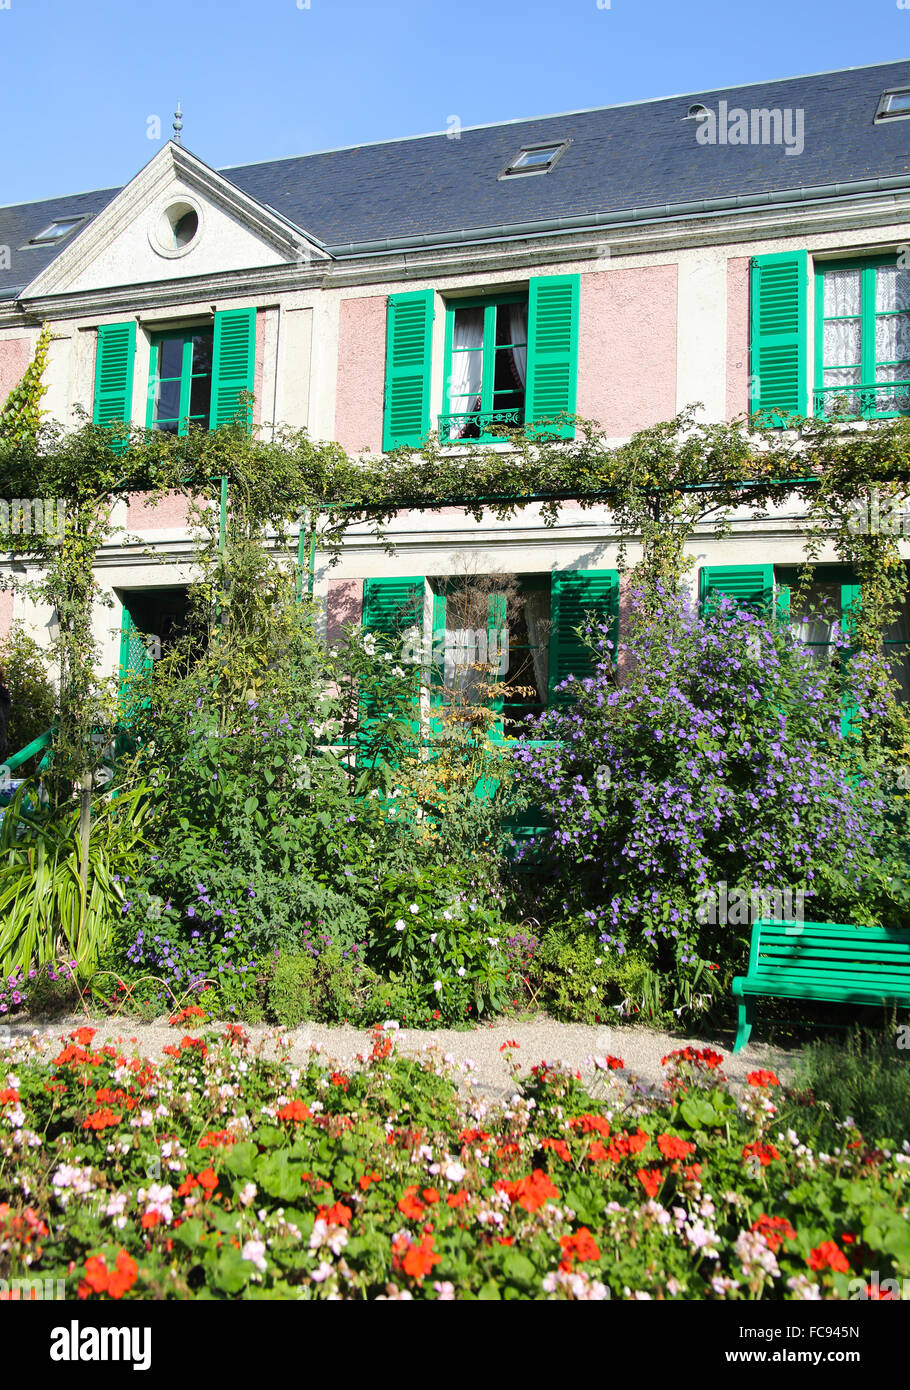 Part of Monet's house showing the green shutters and pink walls, Giverny, Normandy, France, Europe Stock Photo